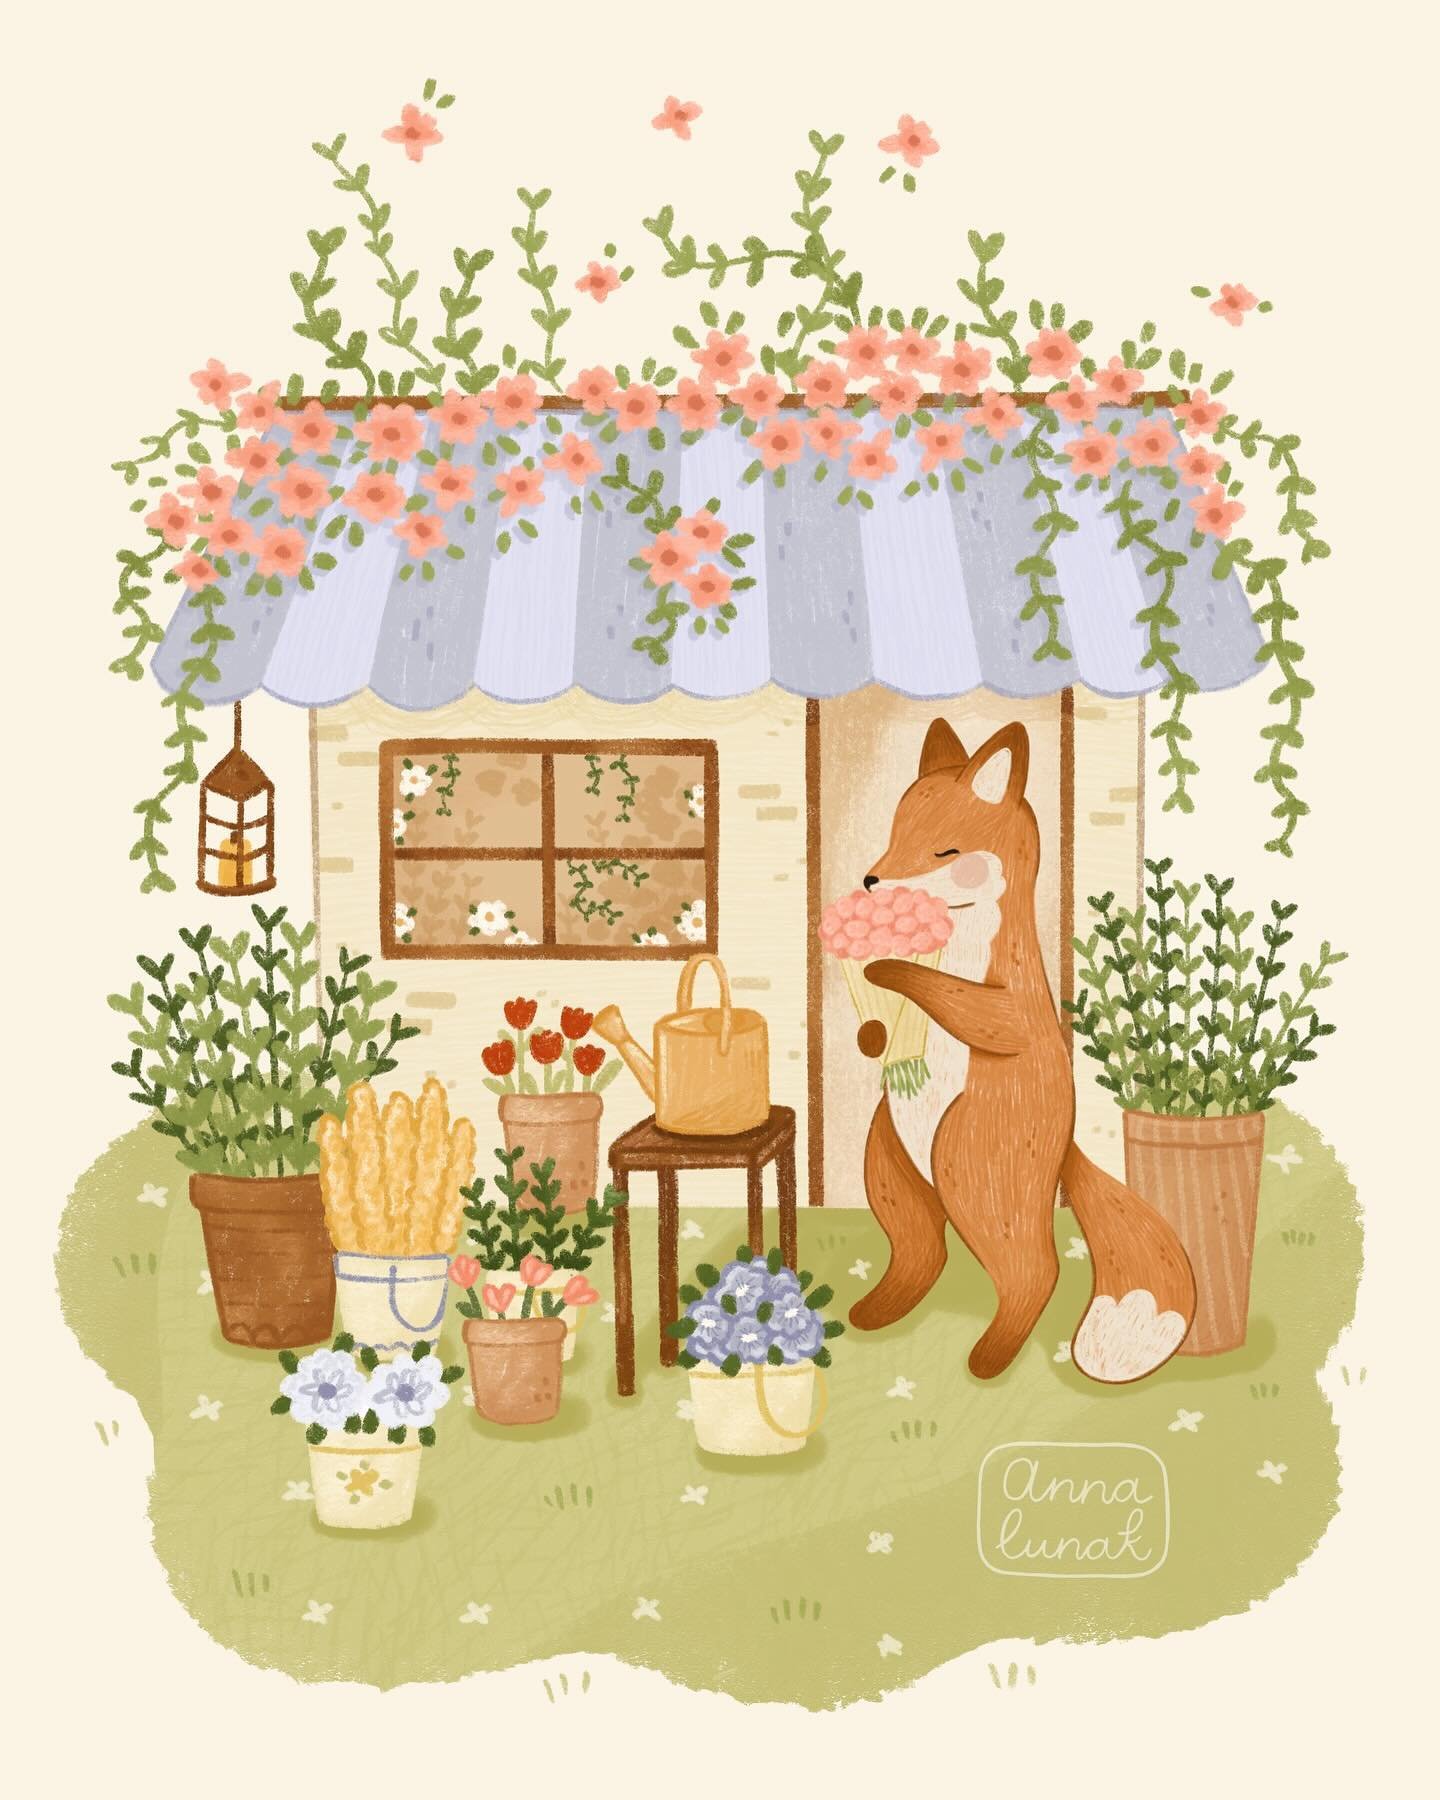 Spring feelings with all these flowers 🌹 

I&lsquo;m trying to get back to regular posting here again so here is an illustration from last year that I still love a lot 🧡

#foxillustration #cuteillustration #springillustration #cottagecoreillustrati